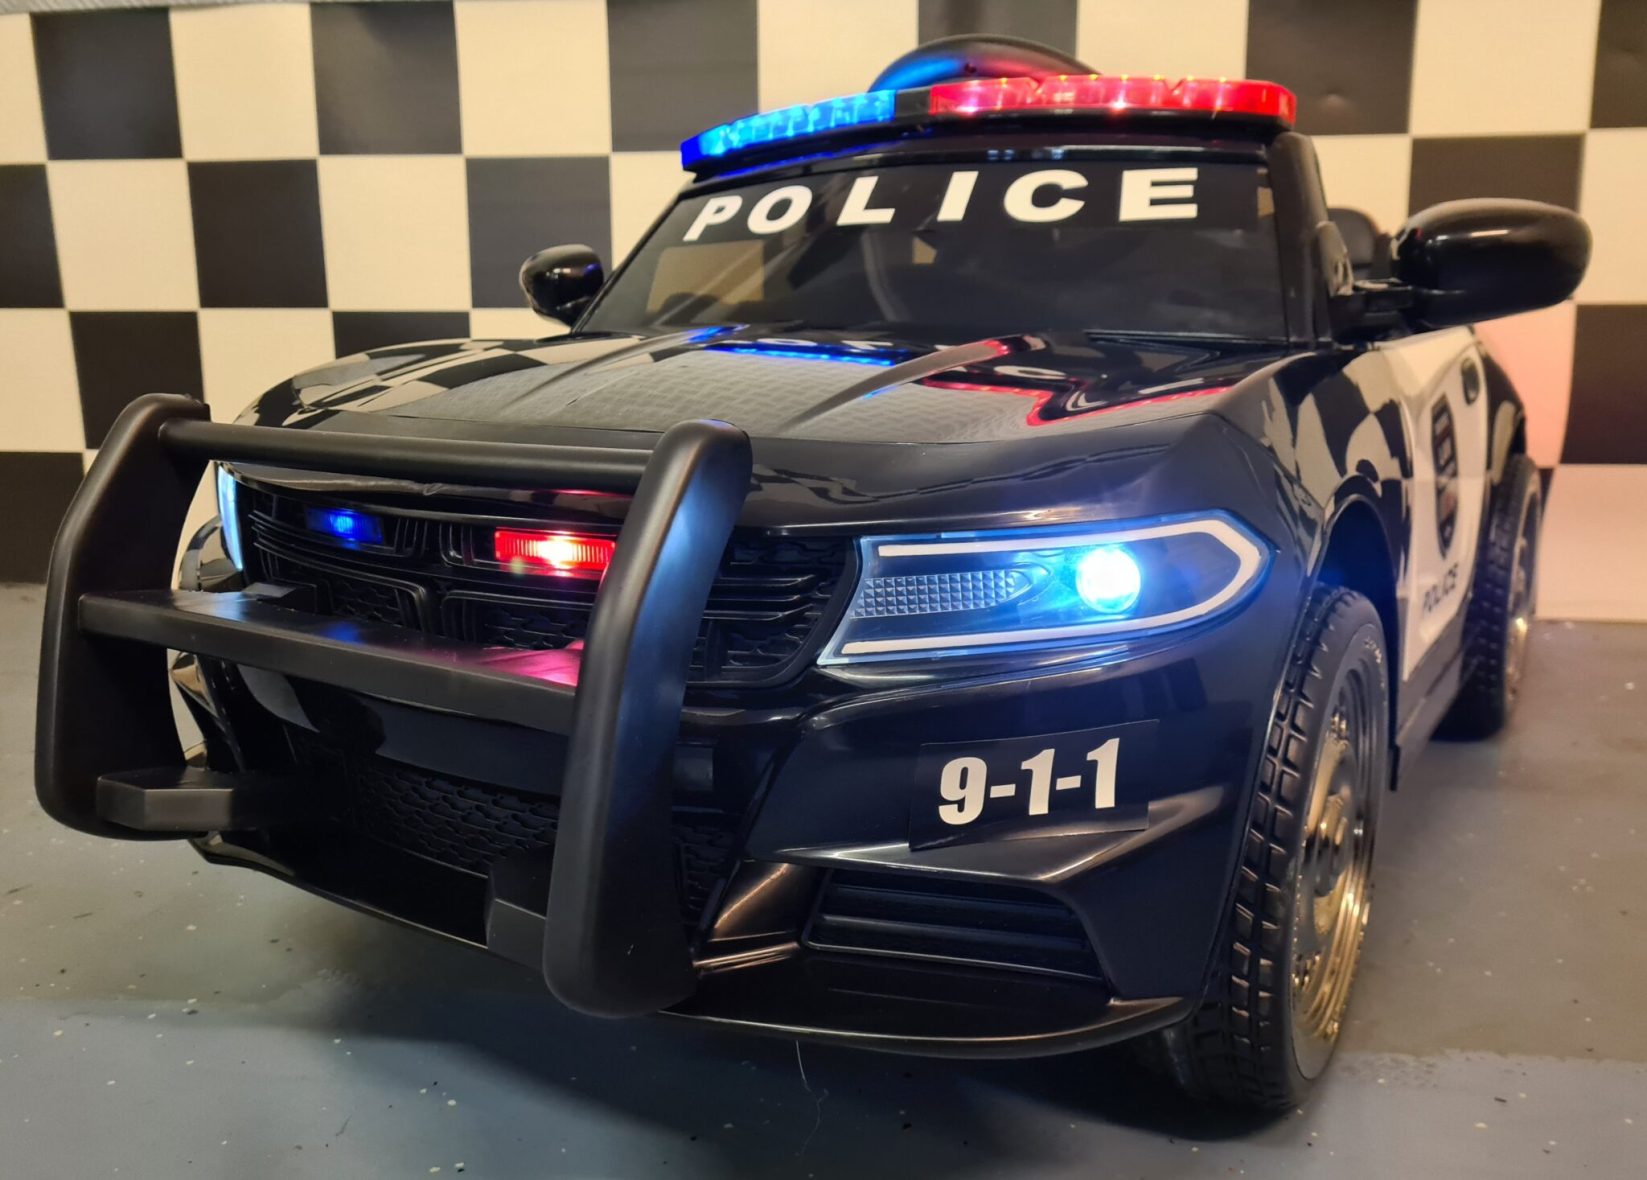 Electric Toy Car Police 12 Volt